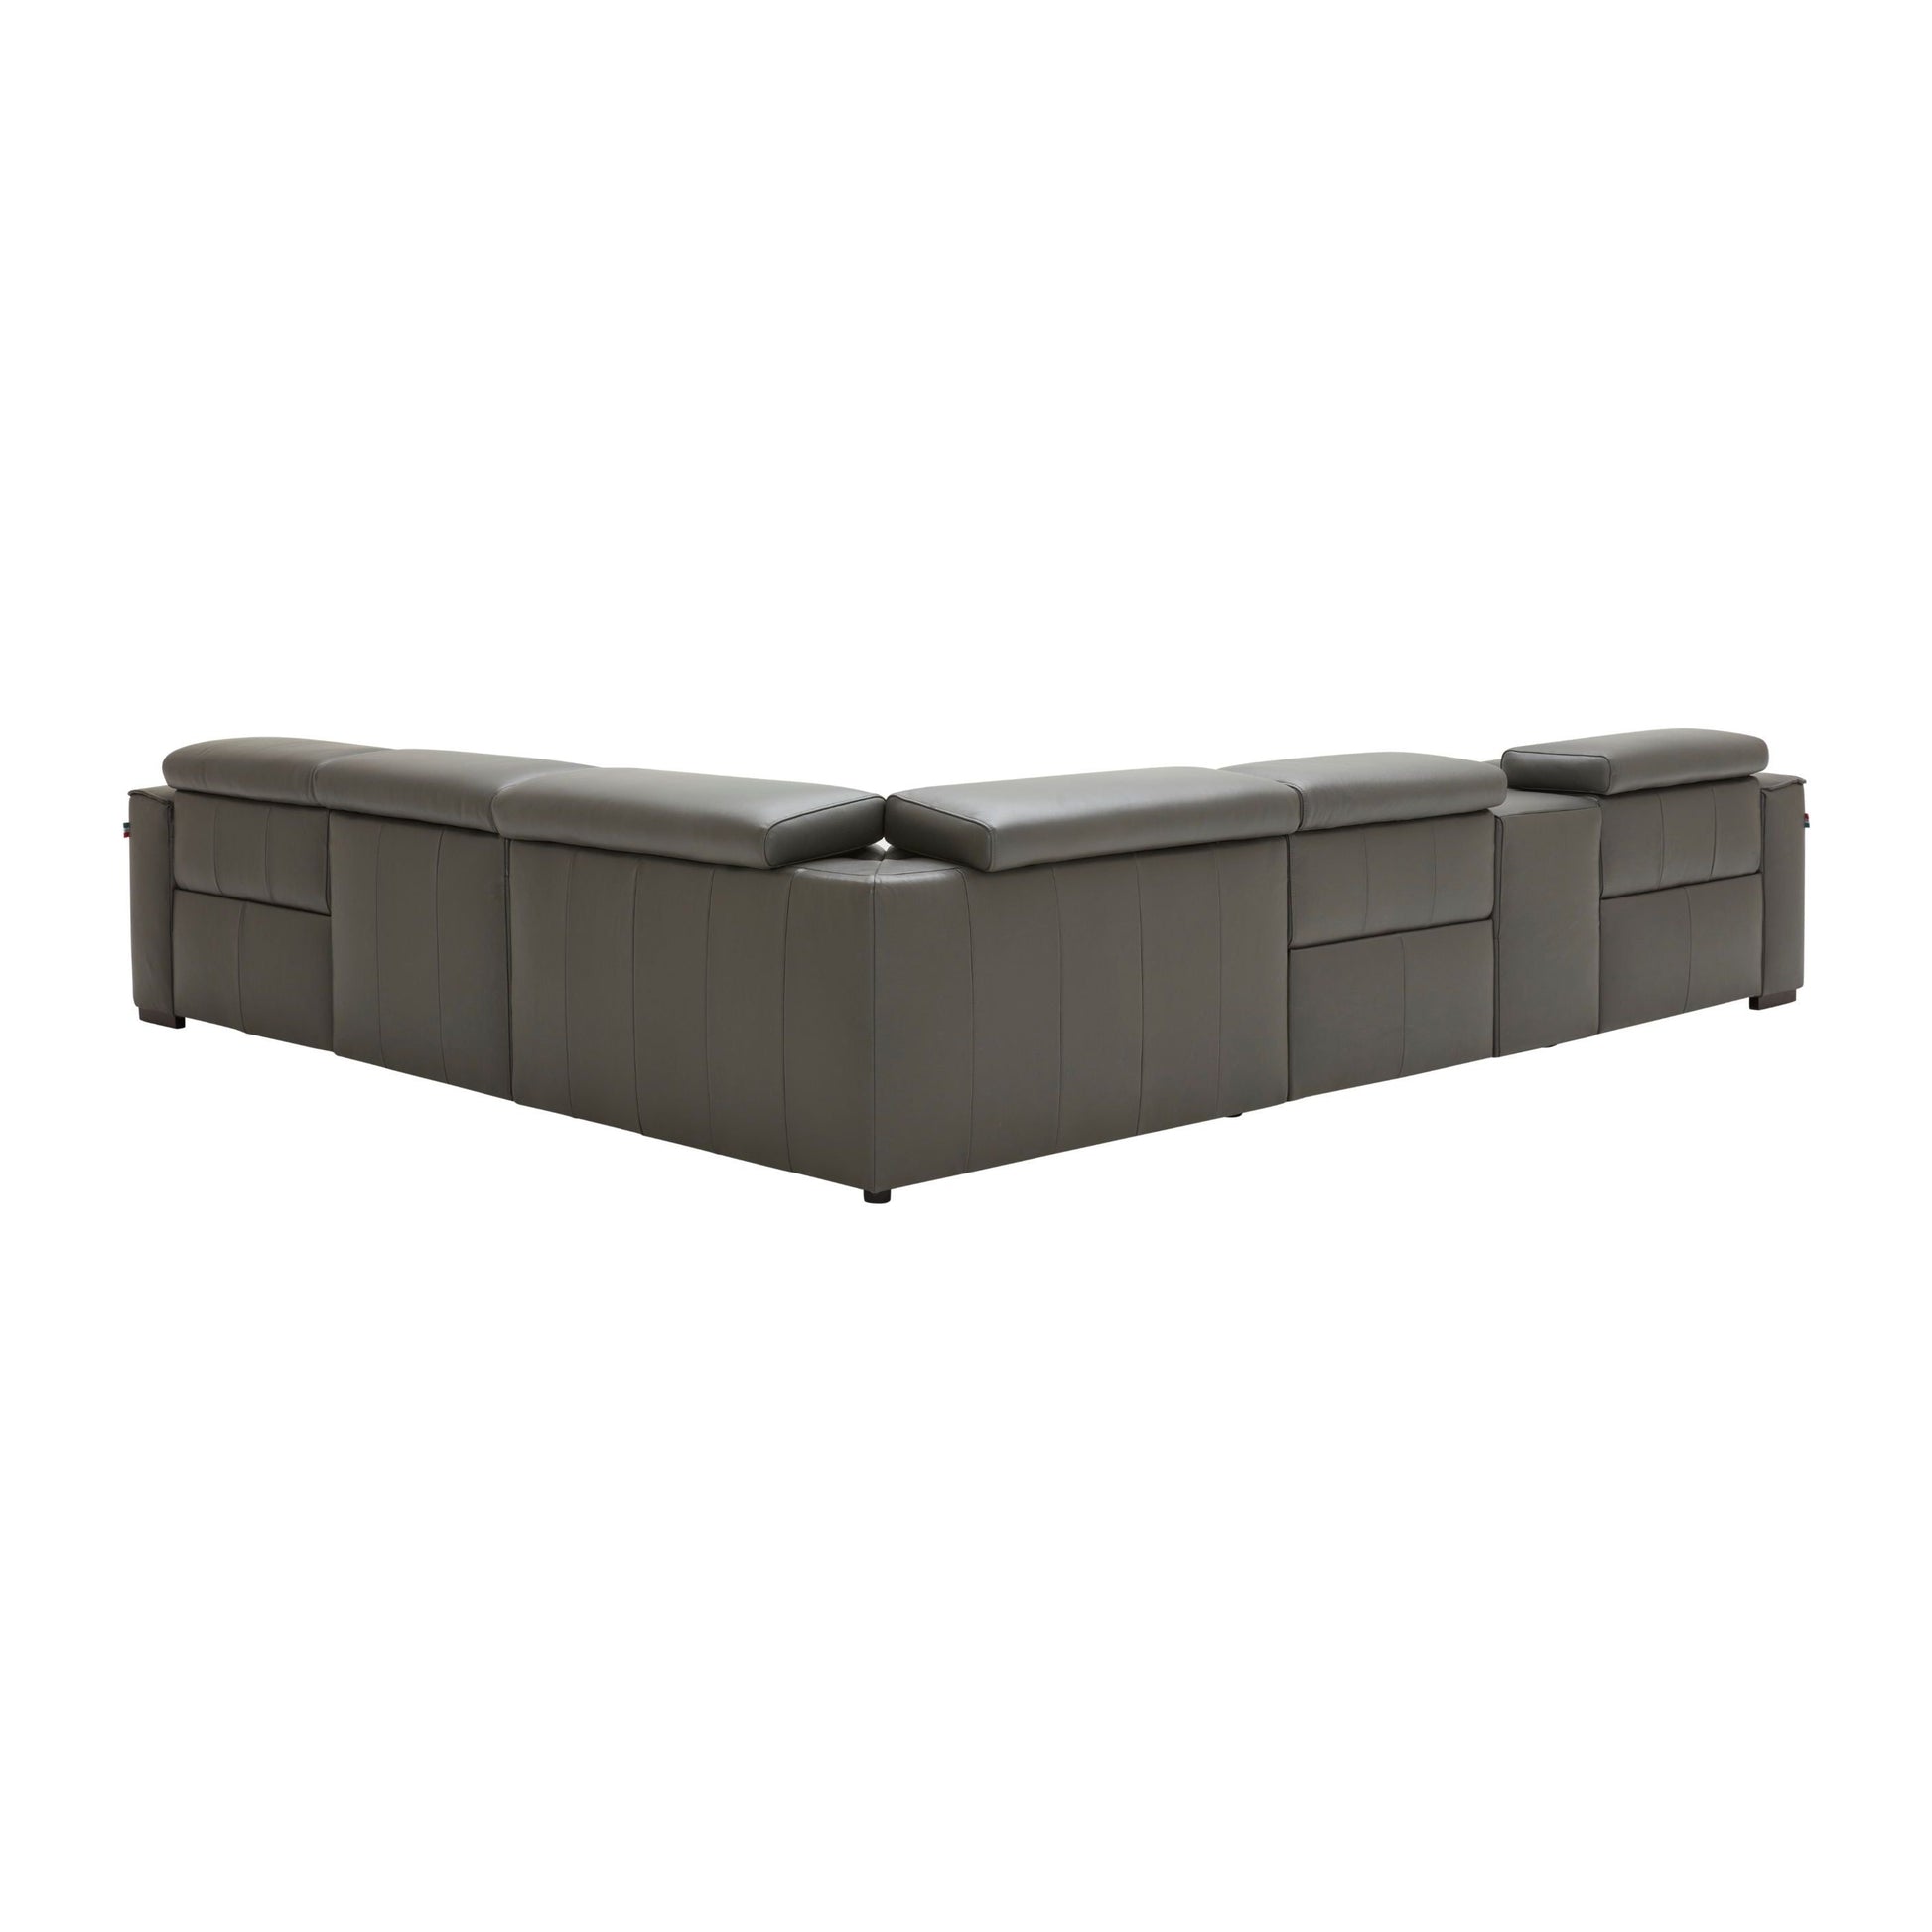 Picasso Motion Sectional in Dark Grey jnmfurniture Sectionals 18865-DG